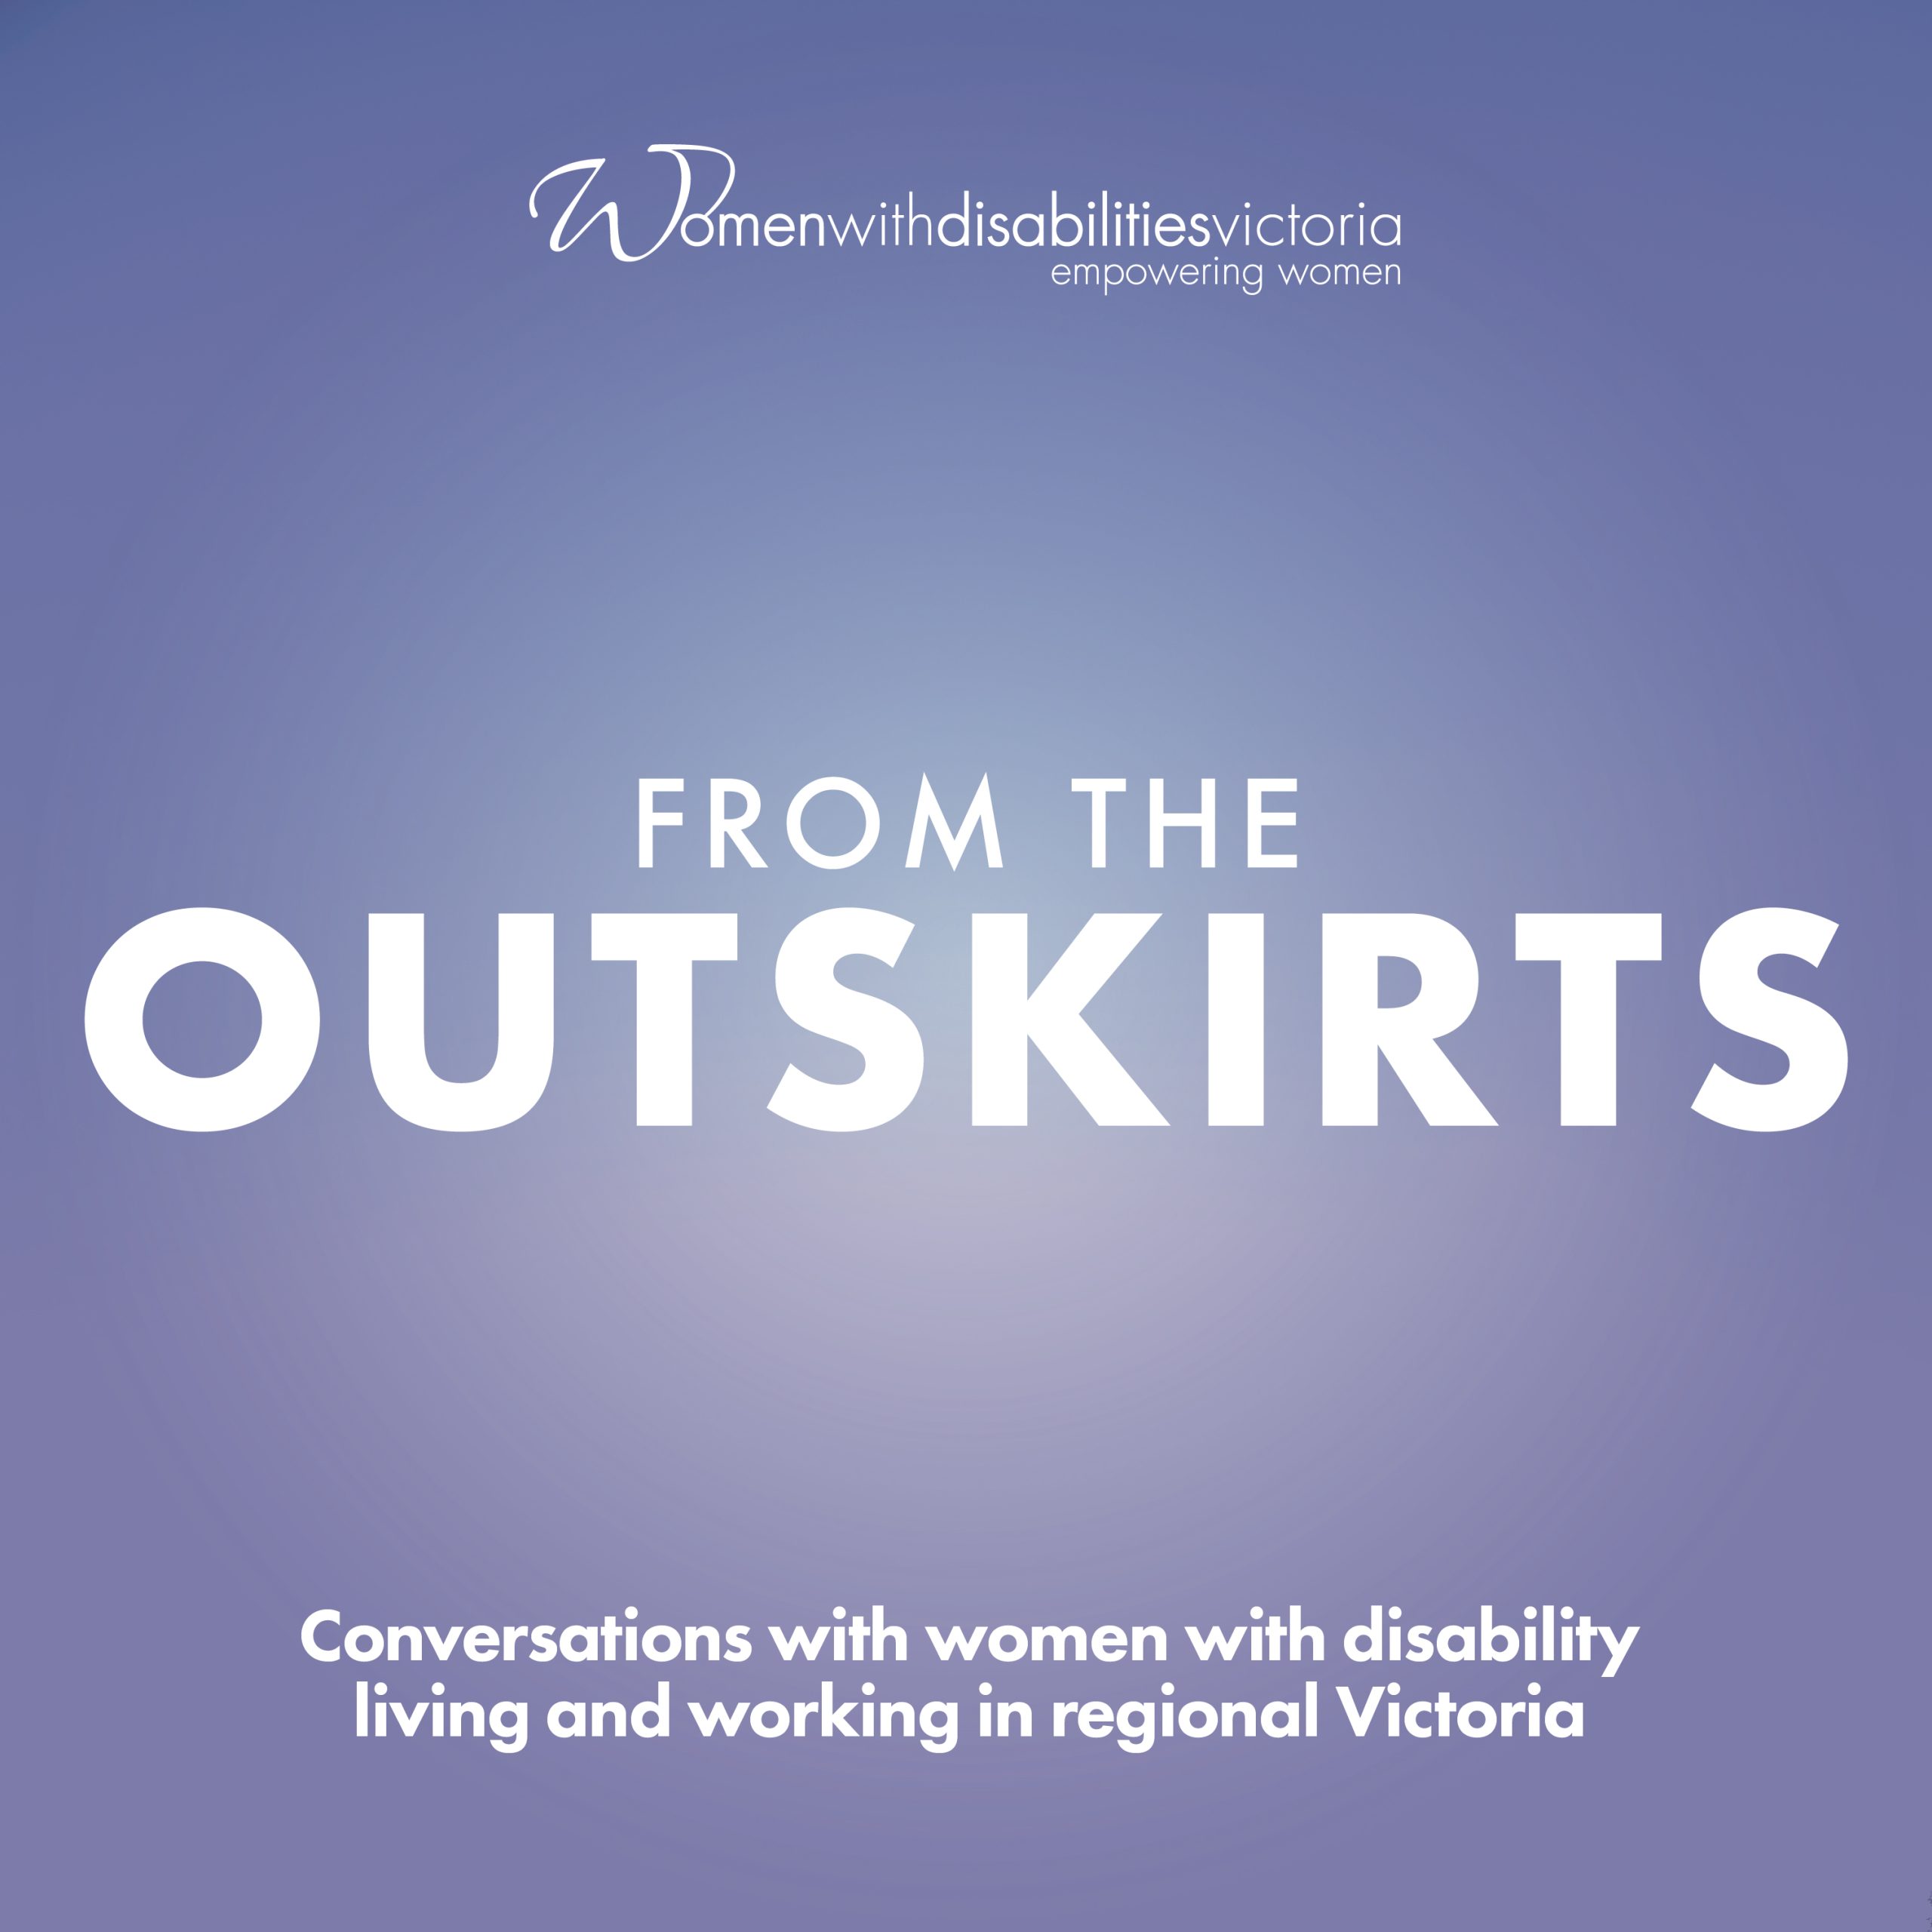 From the Outskirts podcast tile featuring white text on a lilac gradient background with the WDV logo and the words "conversations with women with disability, living and working in rural Victoria.